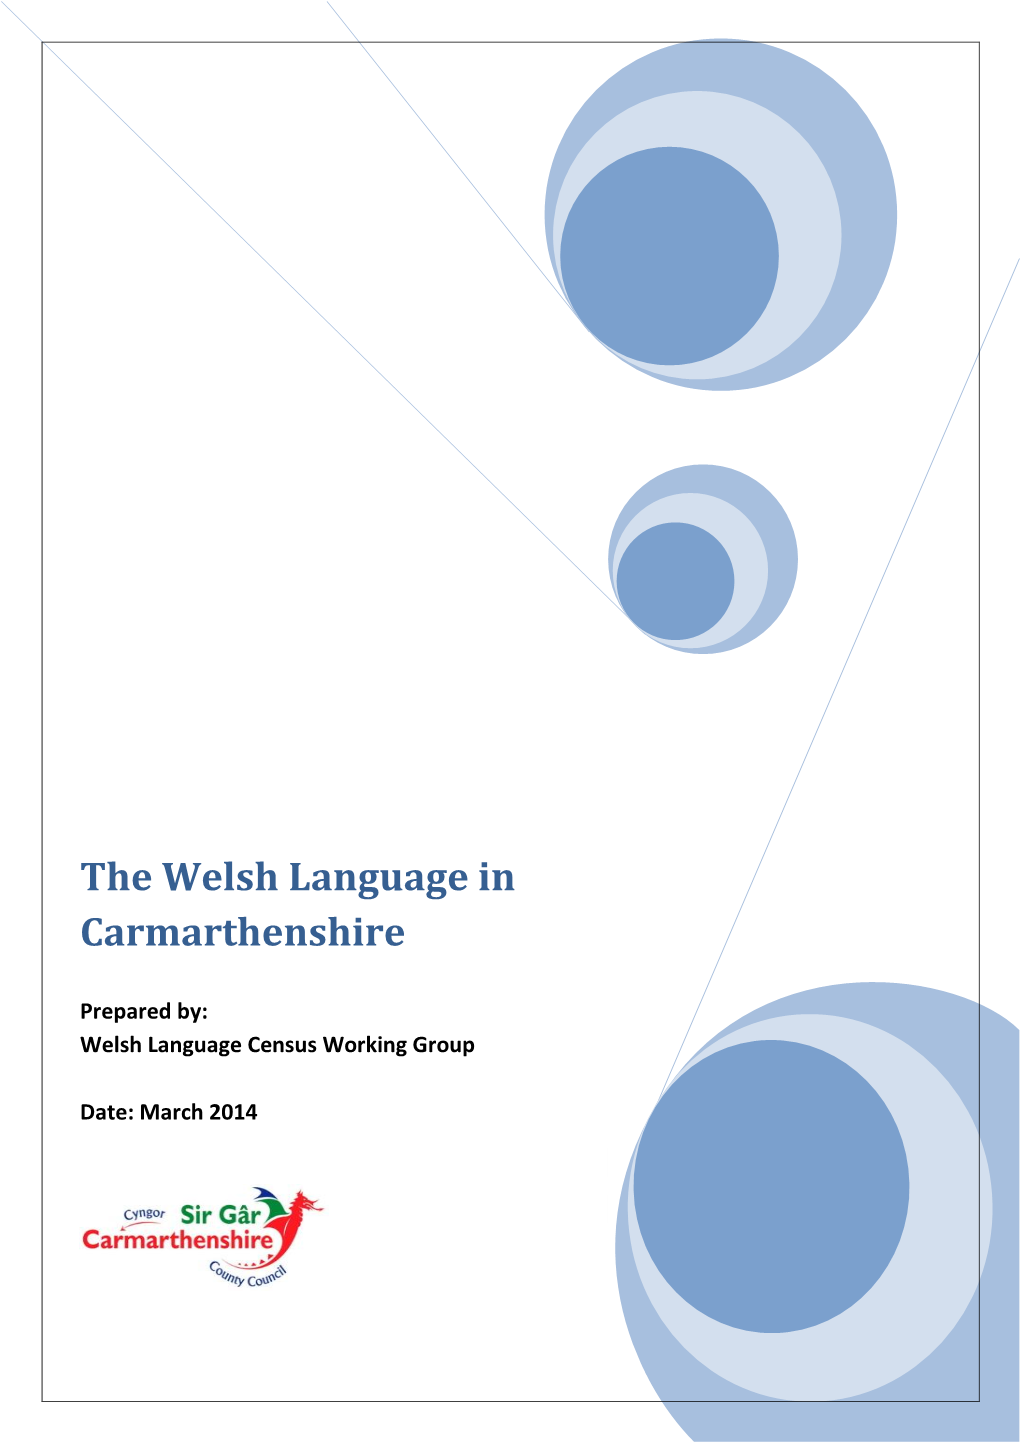 The Welsh Language in Carmarthenshire